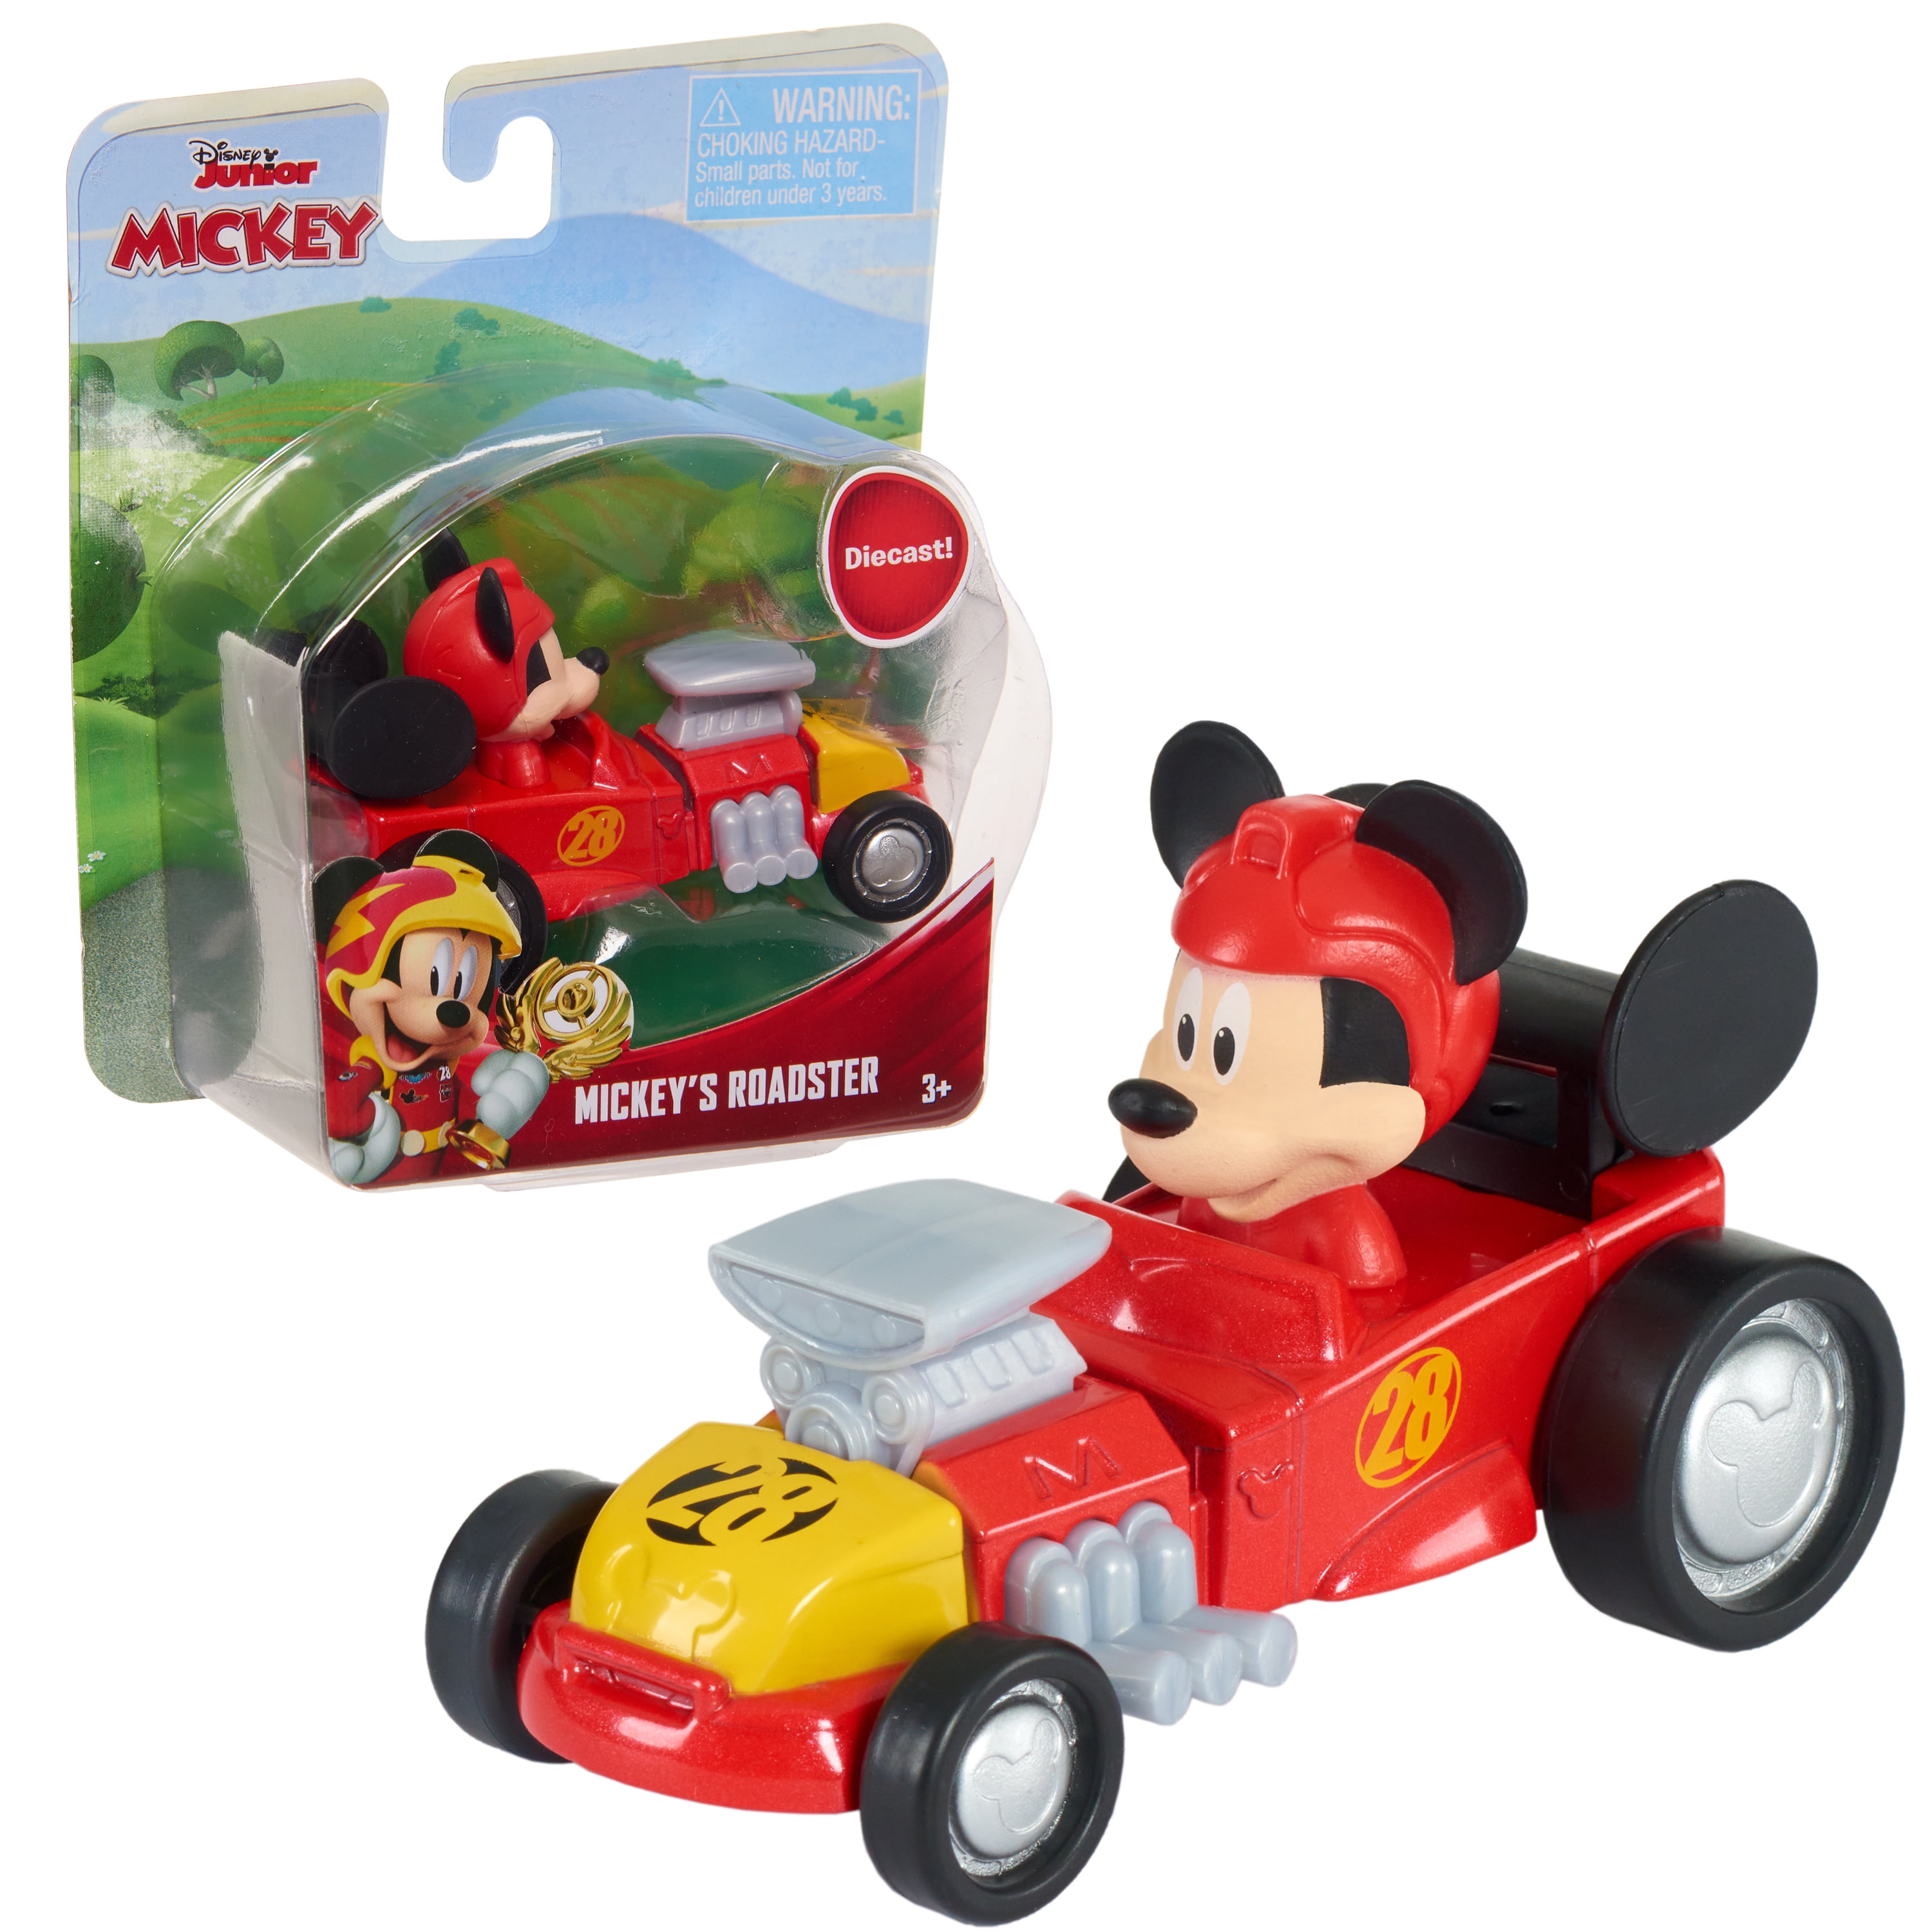 Replacement Parts for Mickey Mouse Zip Slide and Zoom Clubhouse DMC67 ~ Replacement Hot Air Balloon Red Car and Mickey Mouse Figure 